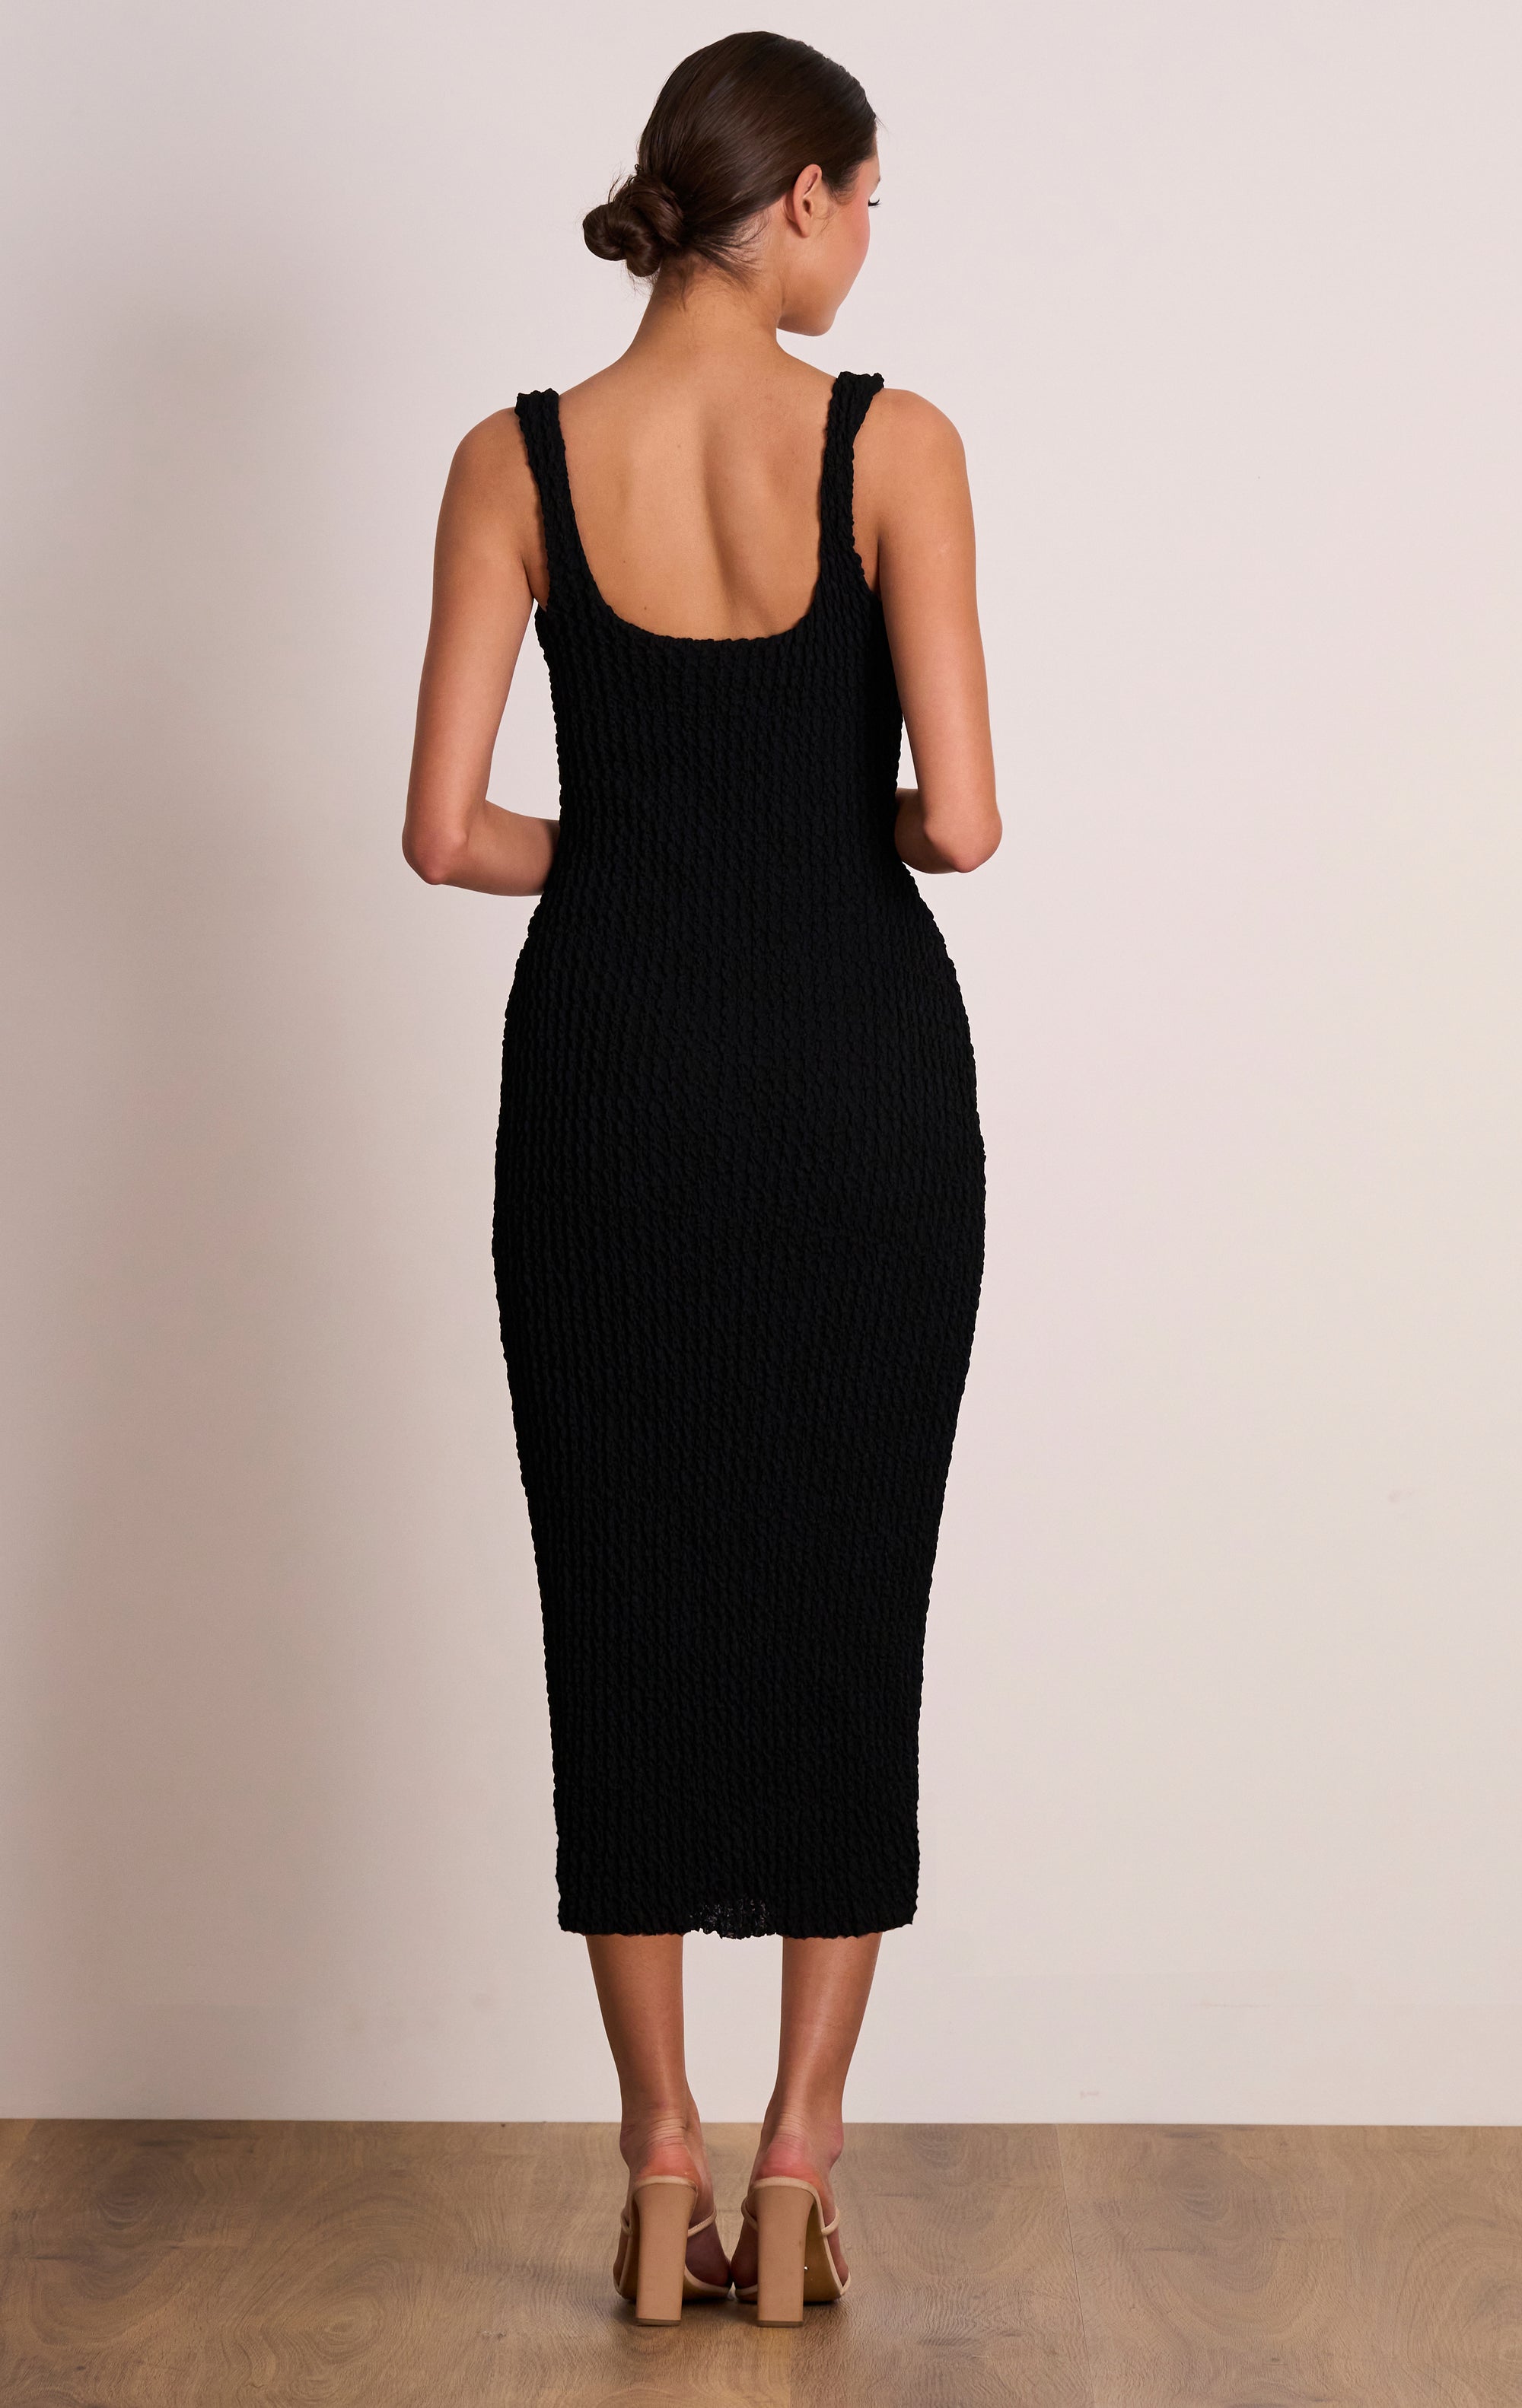 Spritz Midi - TAKE 40% OFF DISCOUNT APPLIED AT CHECKOUT